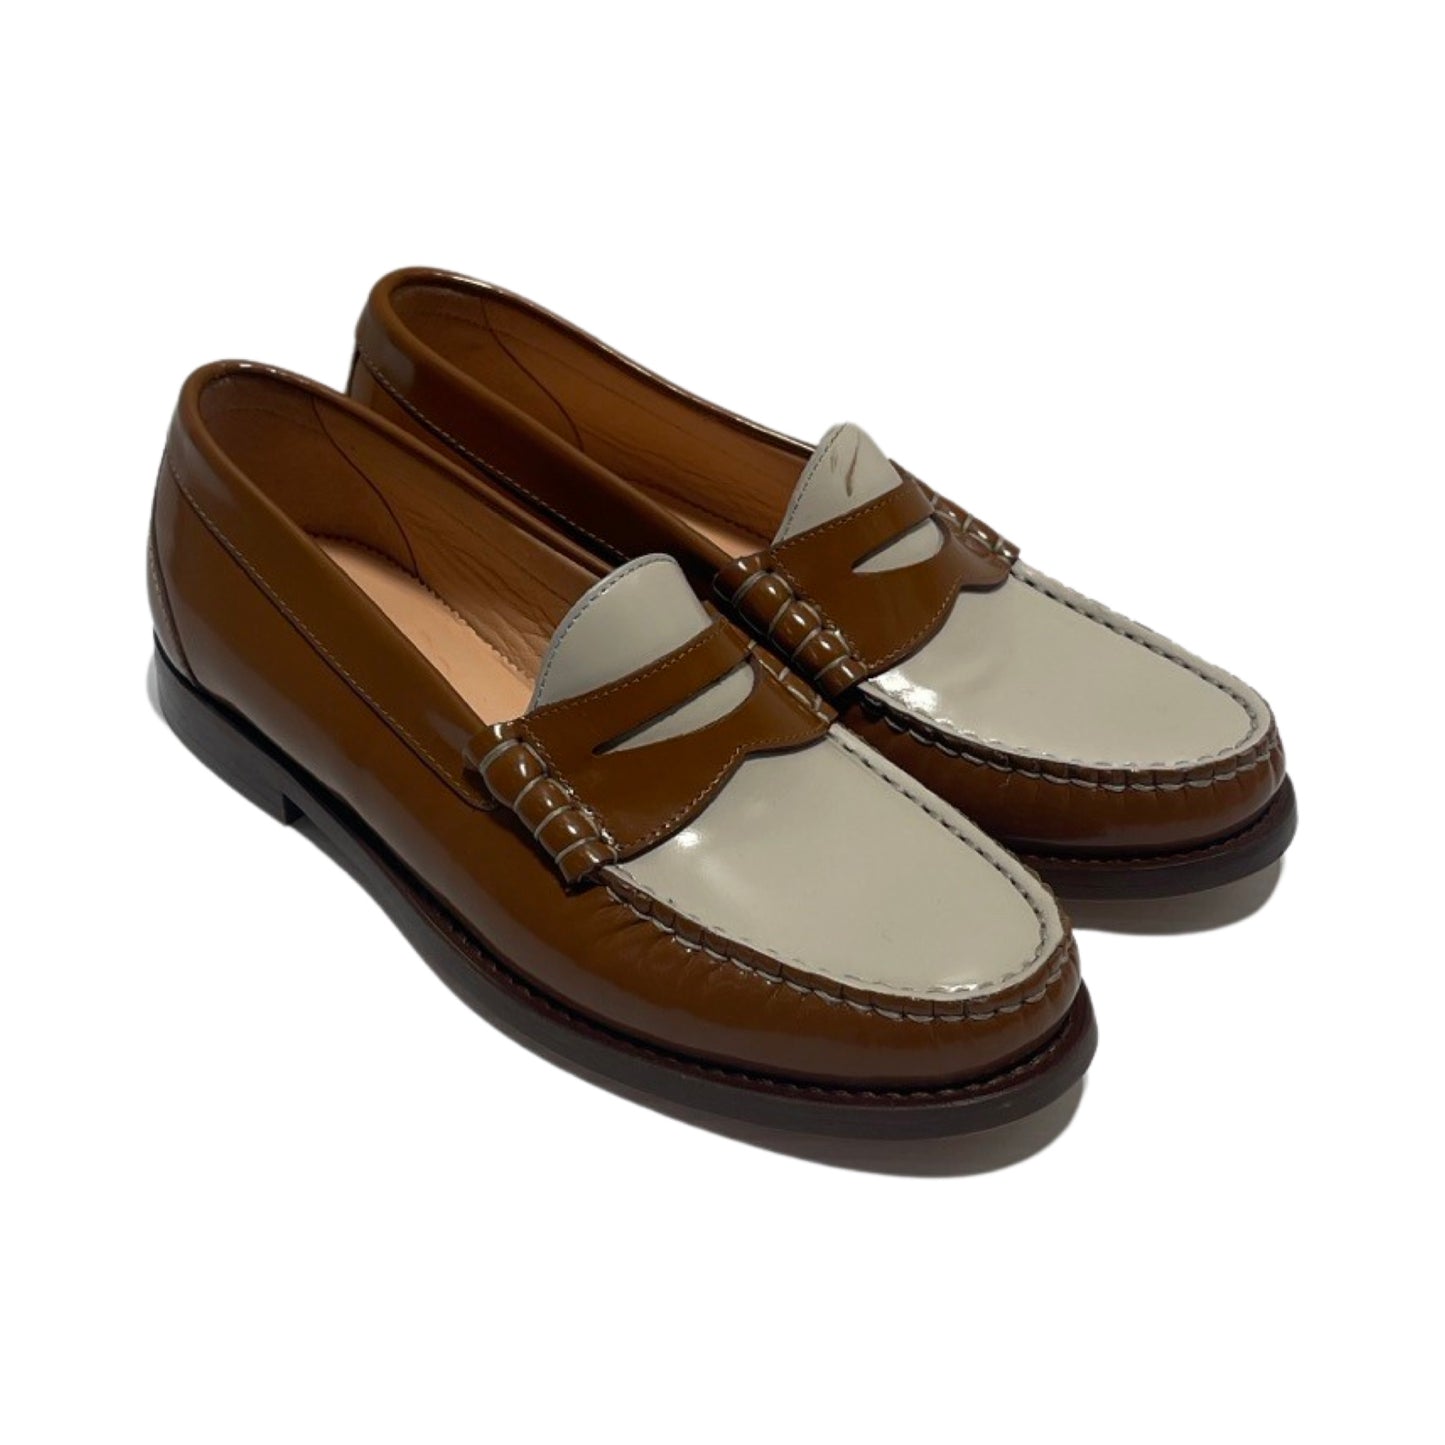 Shoes Flats Loafer Oxford By J Crew  Size: 6